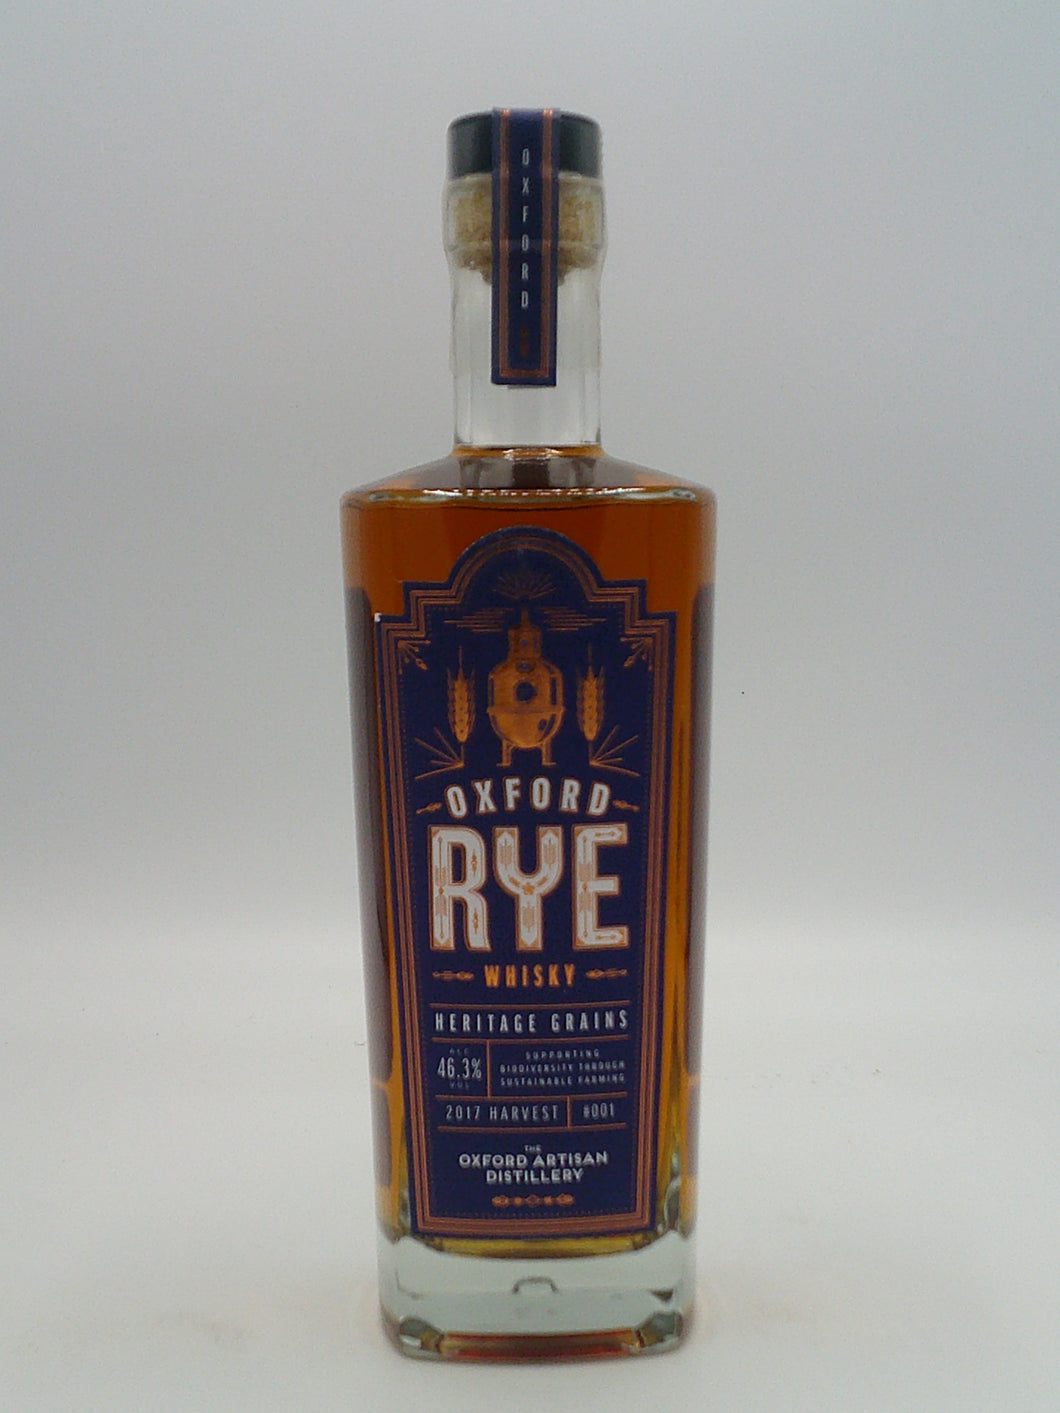 The Oxford Artisan Distillery Rye Whisky Inaugural Release Batch 1